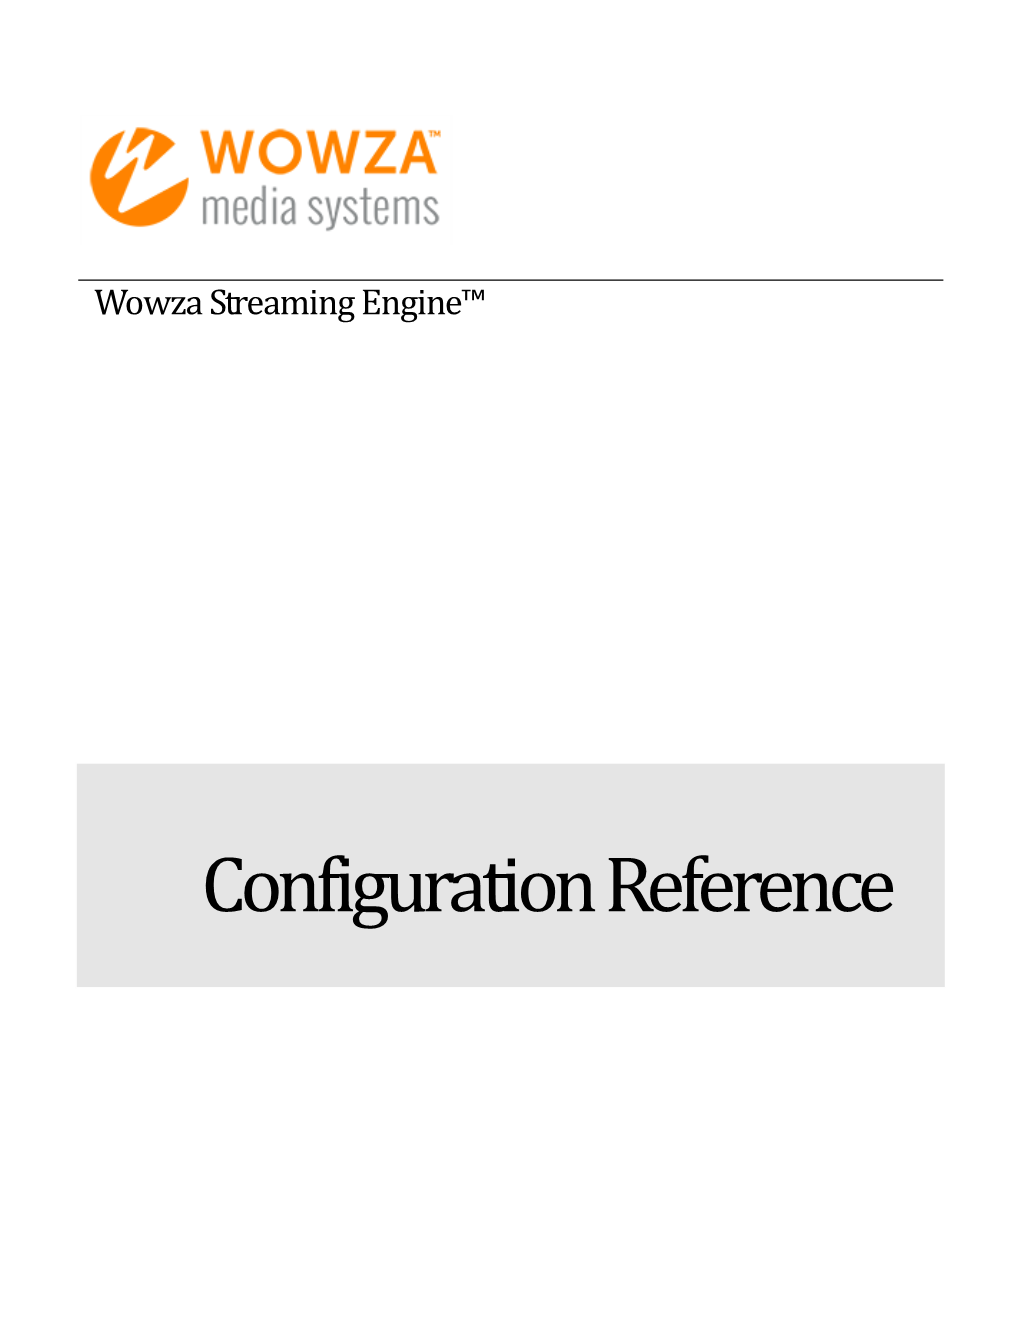 Wowza Streaming Engine: Configuration Reference Version